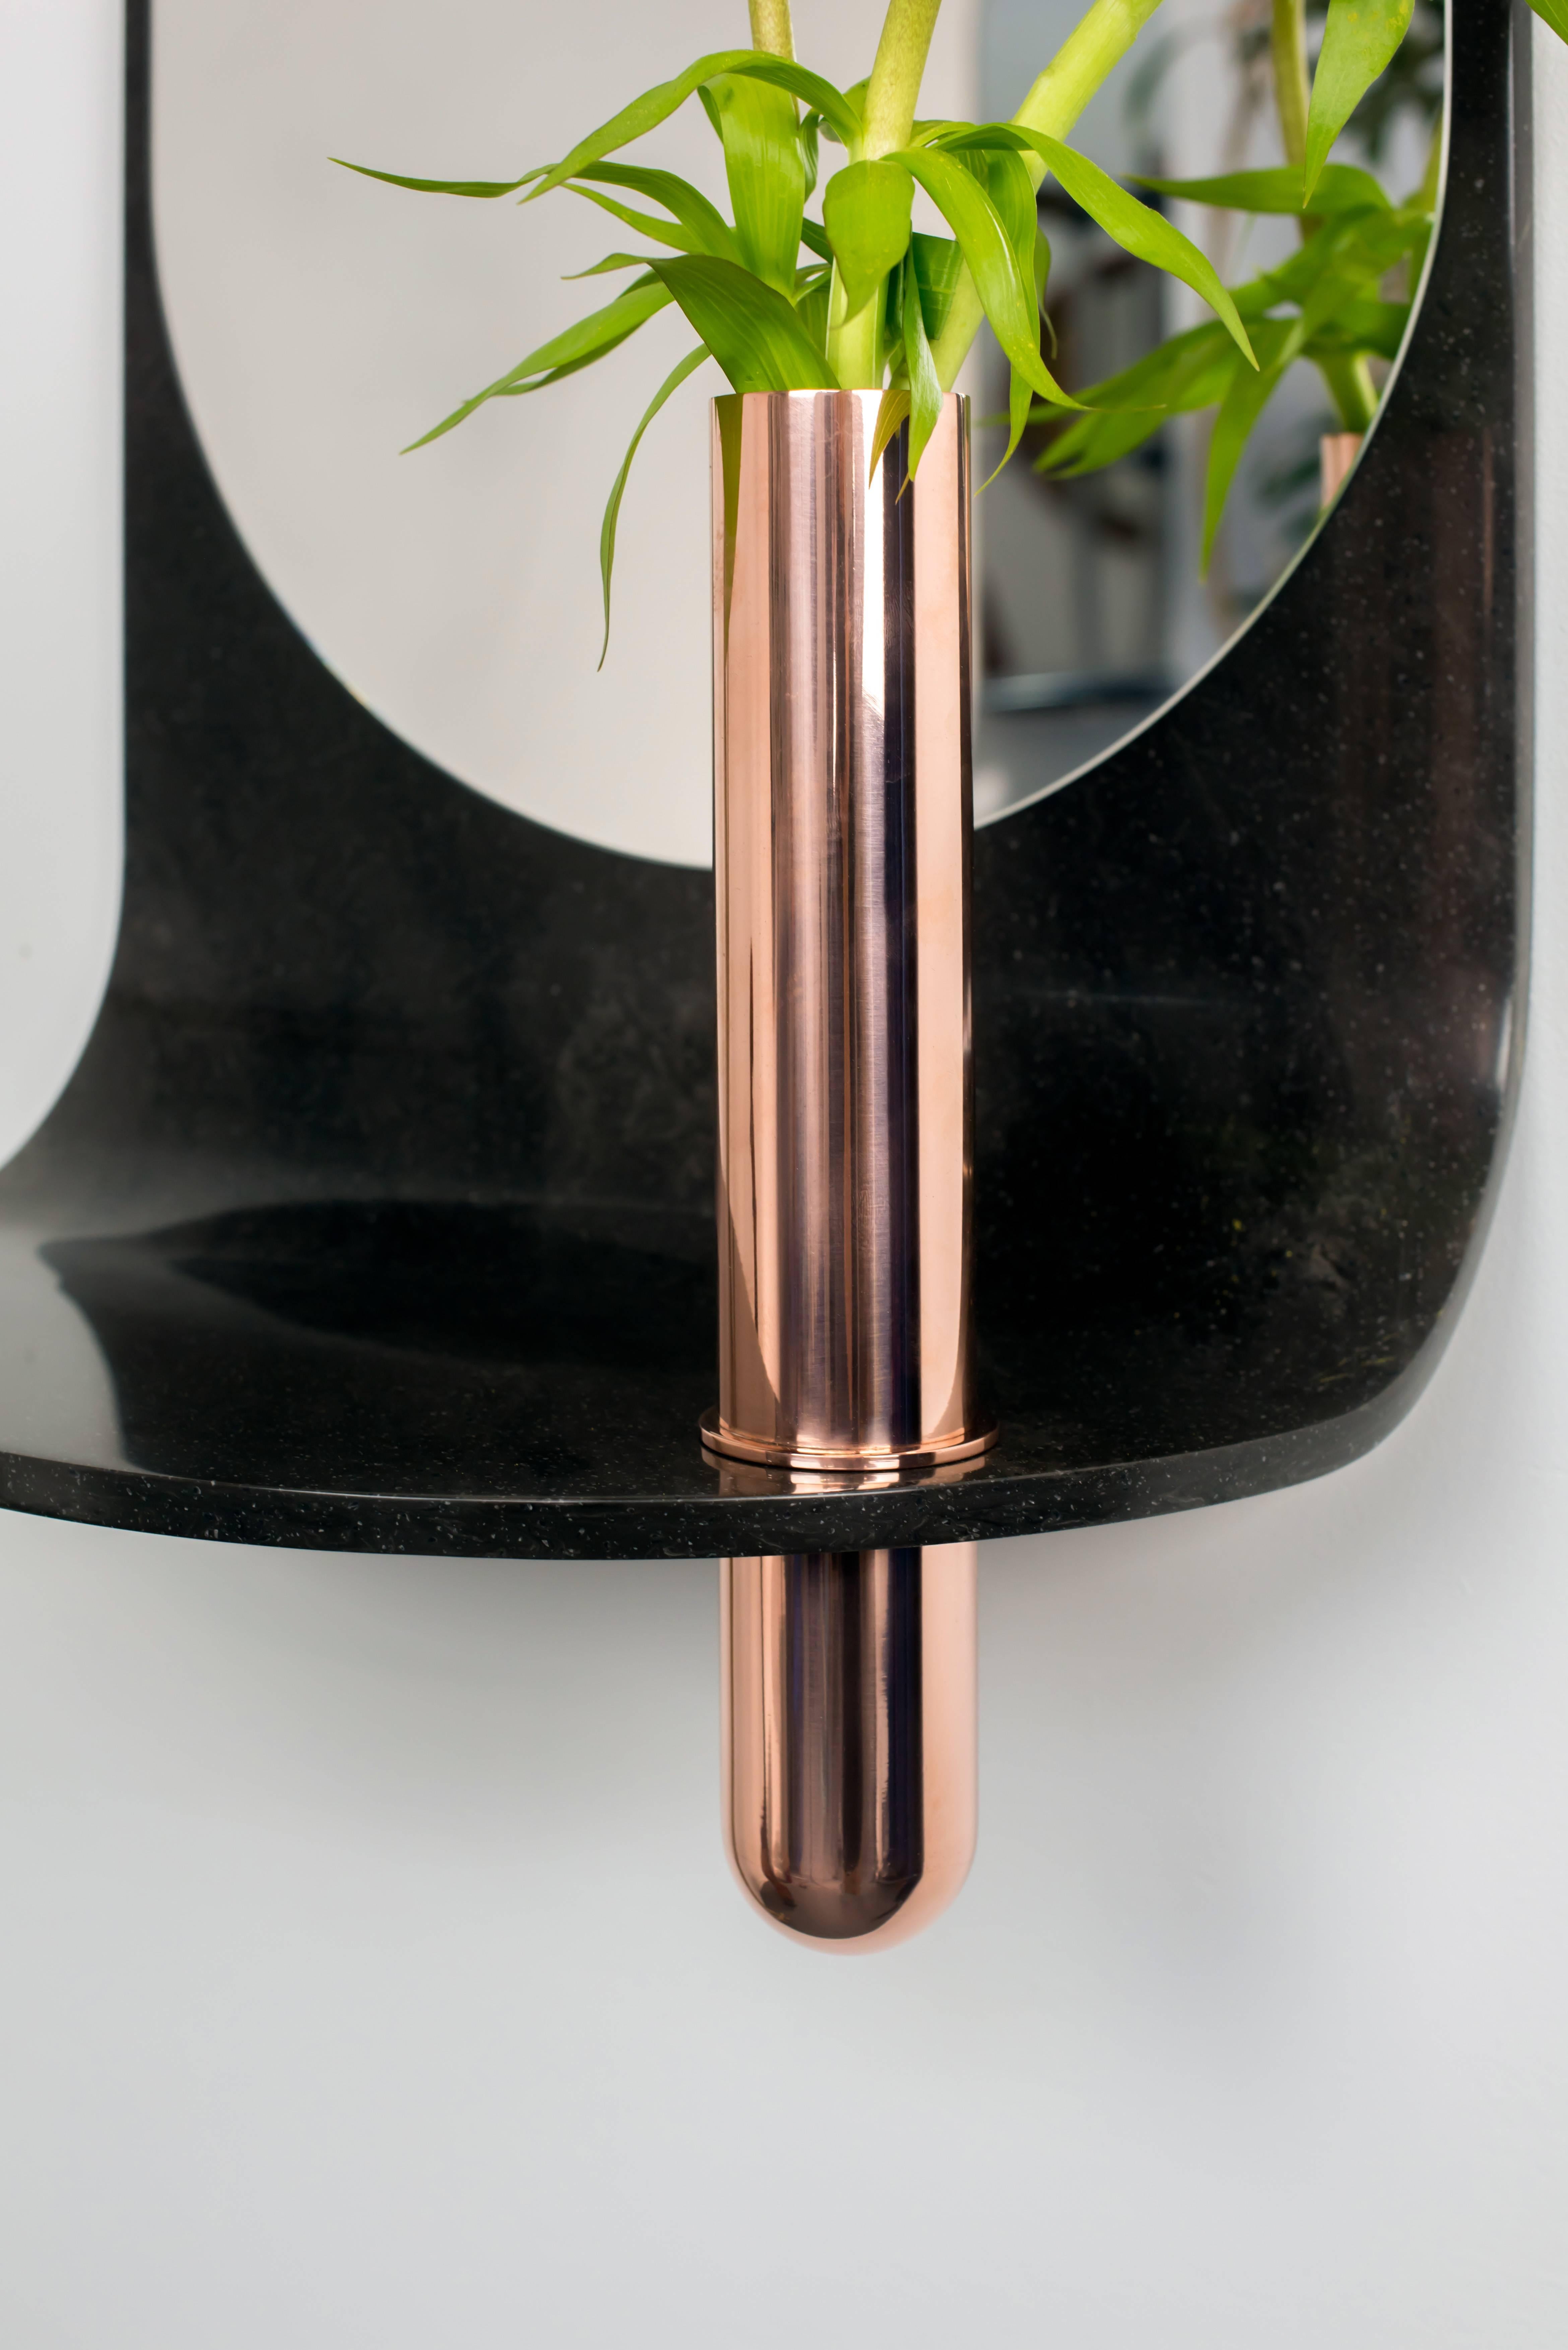 Swoop Mirror in Curved Stone with Copper Vase by Birnam Wood Studio 3